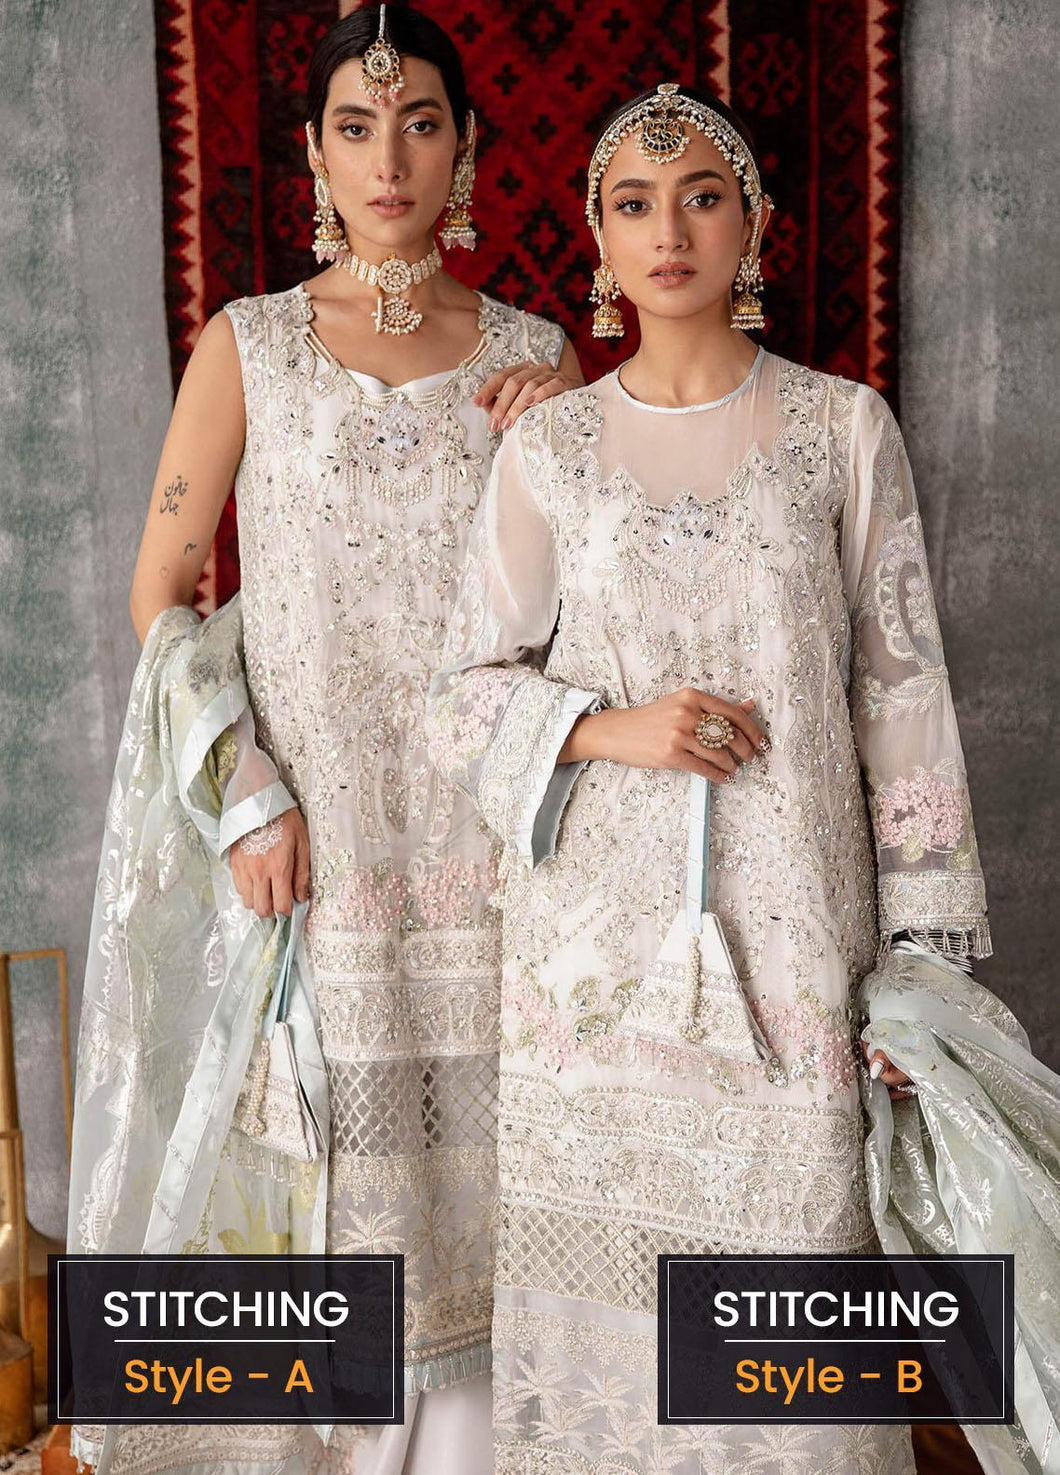 Buy ASIFA & NABEEL | SAKHIYAAN (FESTIVE'22) INDIAN PAKISTANI DESIGNER DRESSES & READY TO WEAR PAKISTANI CLOTHES. Buy ASIFA & NABEEL Collection of Winter Lawn, Original Pakistani Designer Clothing, Unstitched & Stitched suits for women. Next Day Delivery in the UK. Express shipping to USA, France, Germany & Australia.